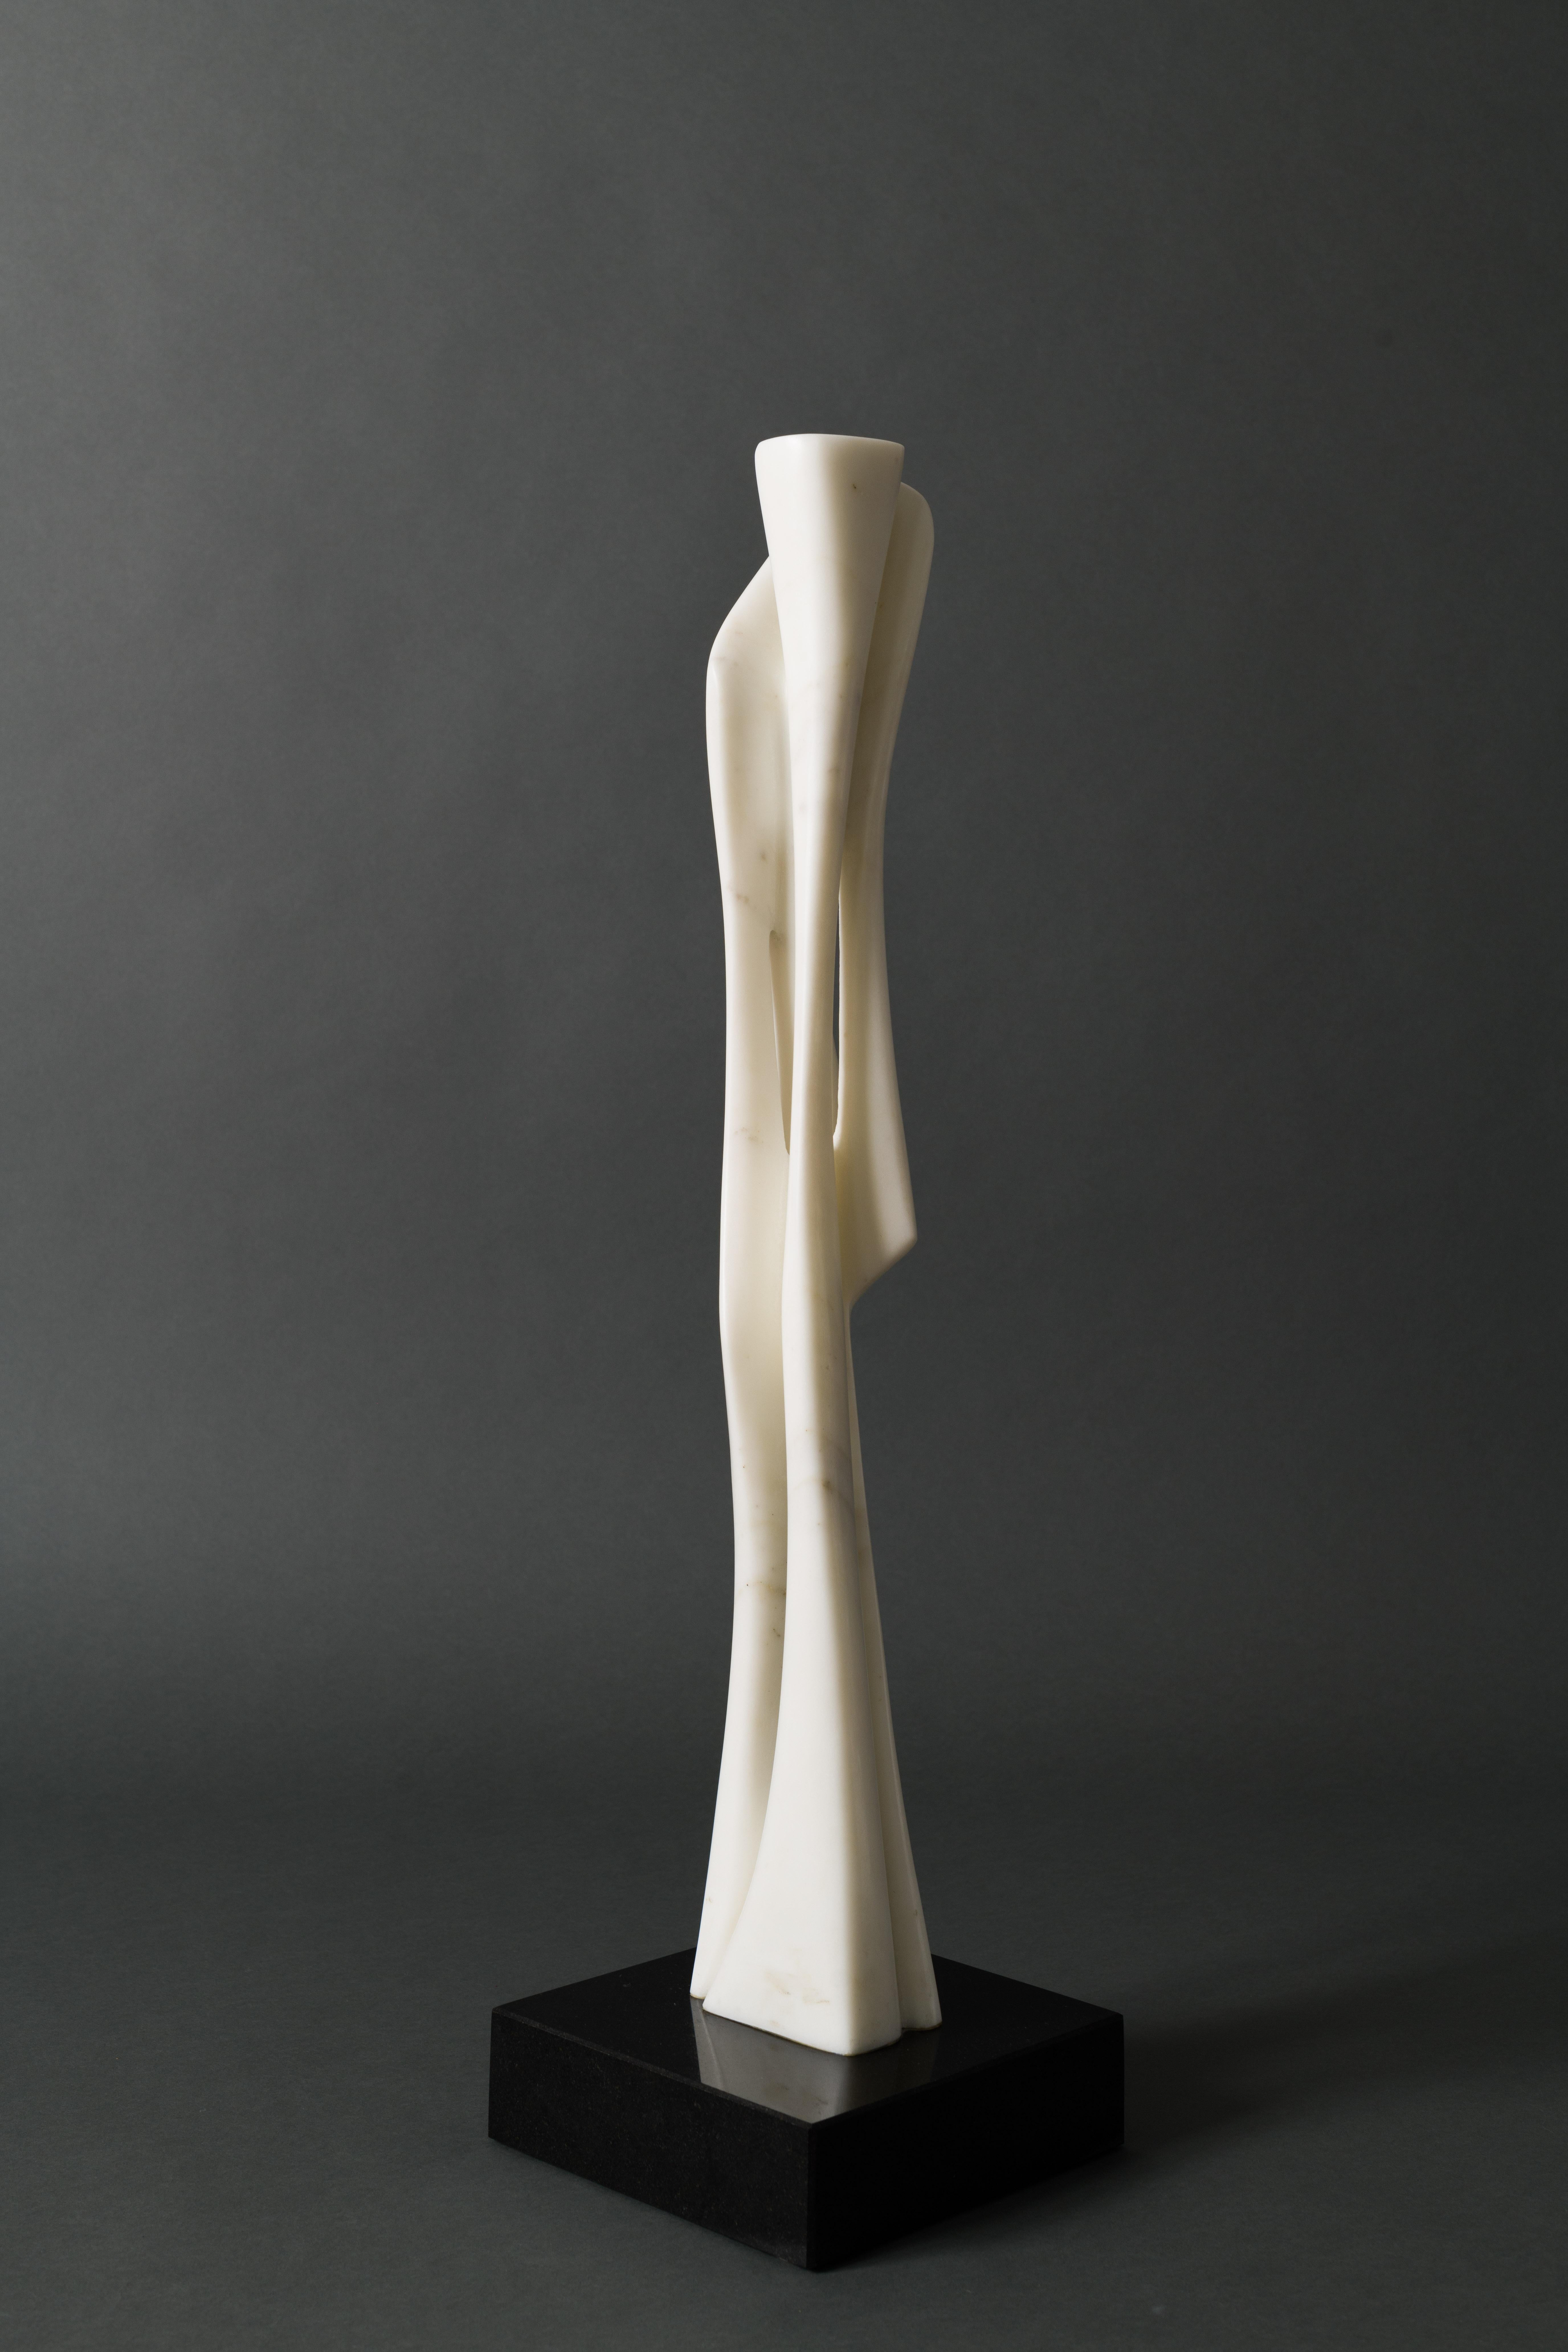 Untitled, 2000 – 2012 is a unique and special composition by the sculptor.  Instead of letting myriad folds be the focal point, it is the verticality and beauty of the stone and its negative space which are at play here.  Making it less a formulaic